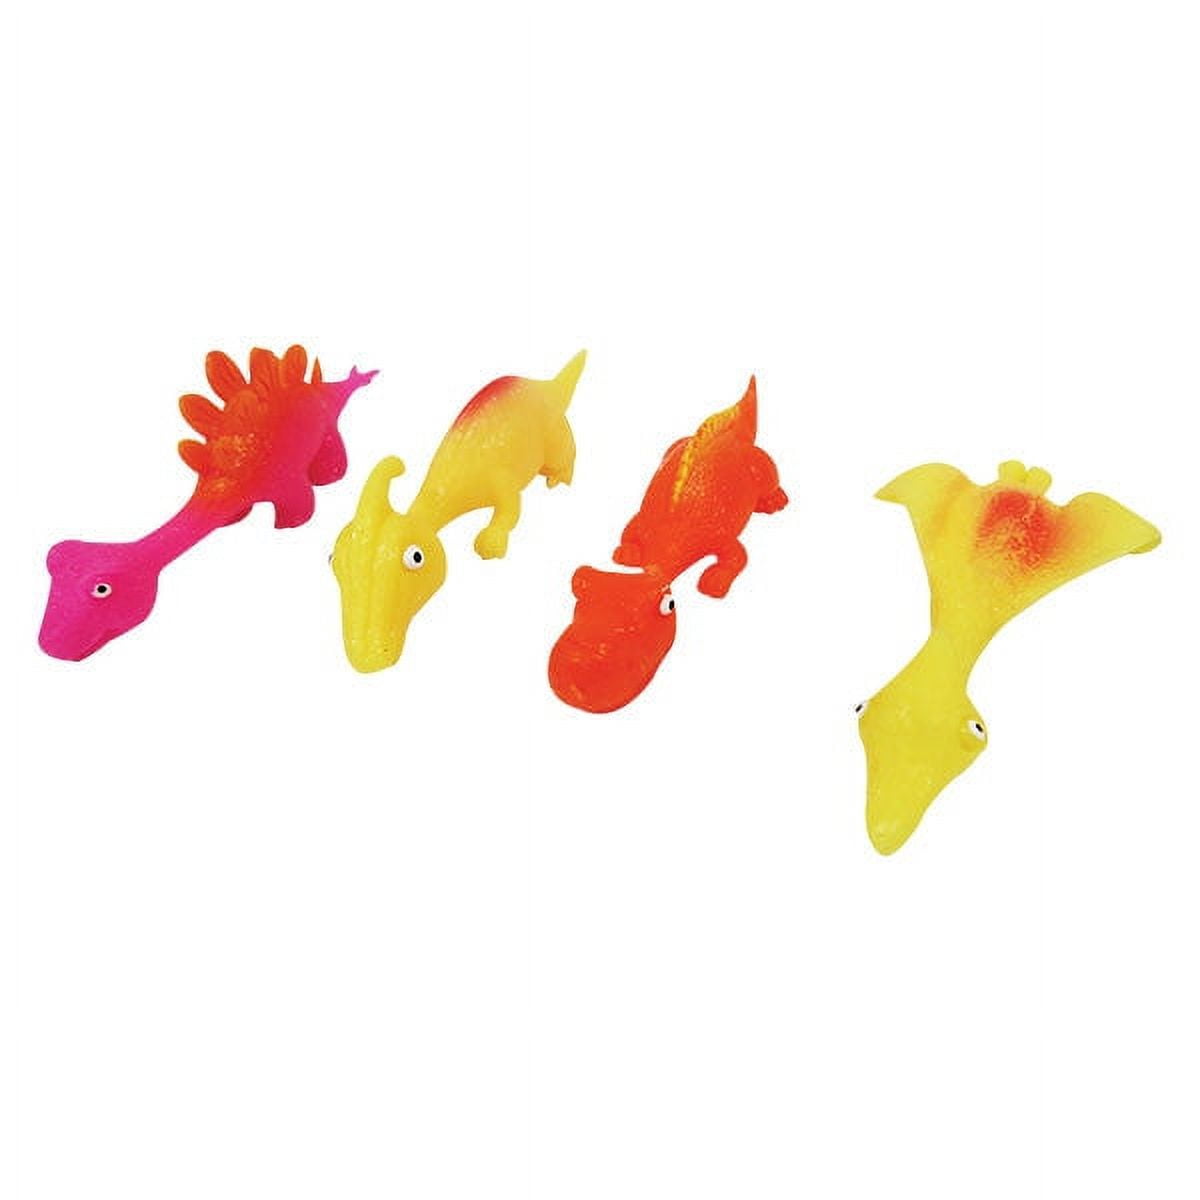 2ct Slingshot Dinosaurs Toy 12 Pkgs - Only $16.20 at Carnival Source